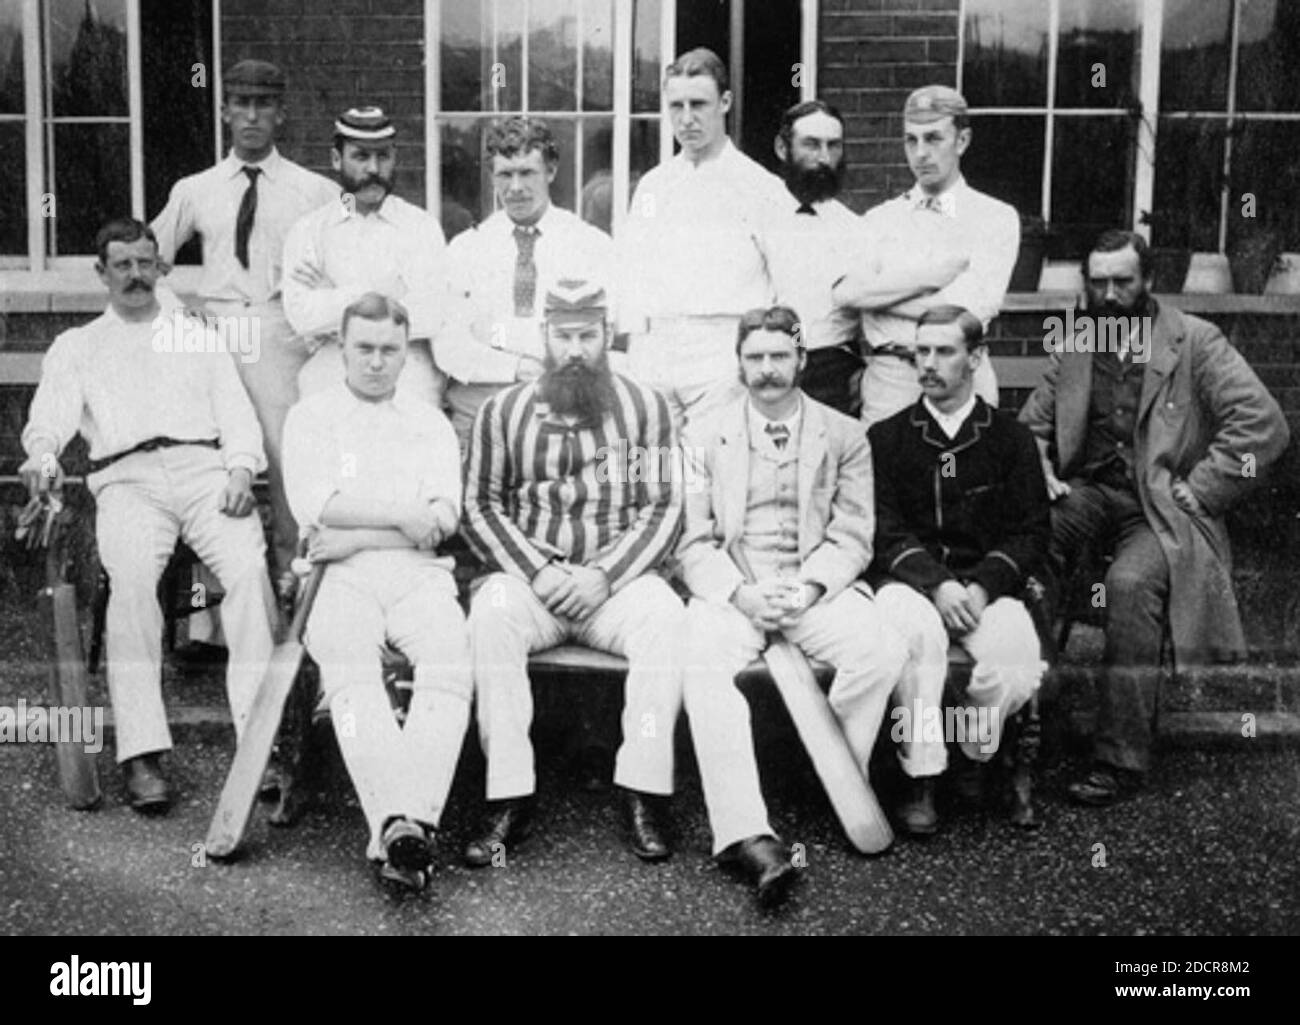 Gloucestershire County Cricket Club in 1880 shortly before Fred Grace's untimely death. W. G. Grace is seated front left centre. Fred (hooped cap) is third left in rear group. Billy Midwinter (directly behind W. G.) is fourth left in rear. E. M. Grace (bearded) is sixth left in rear. Stock Photo